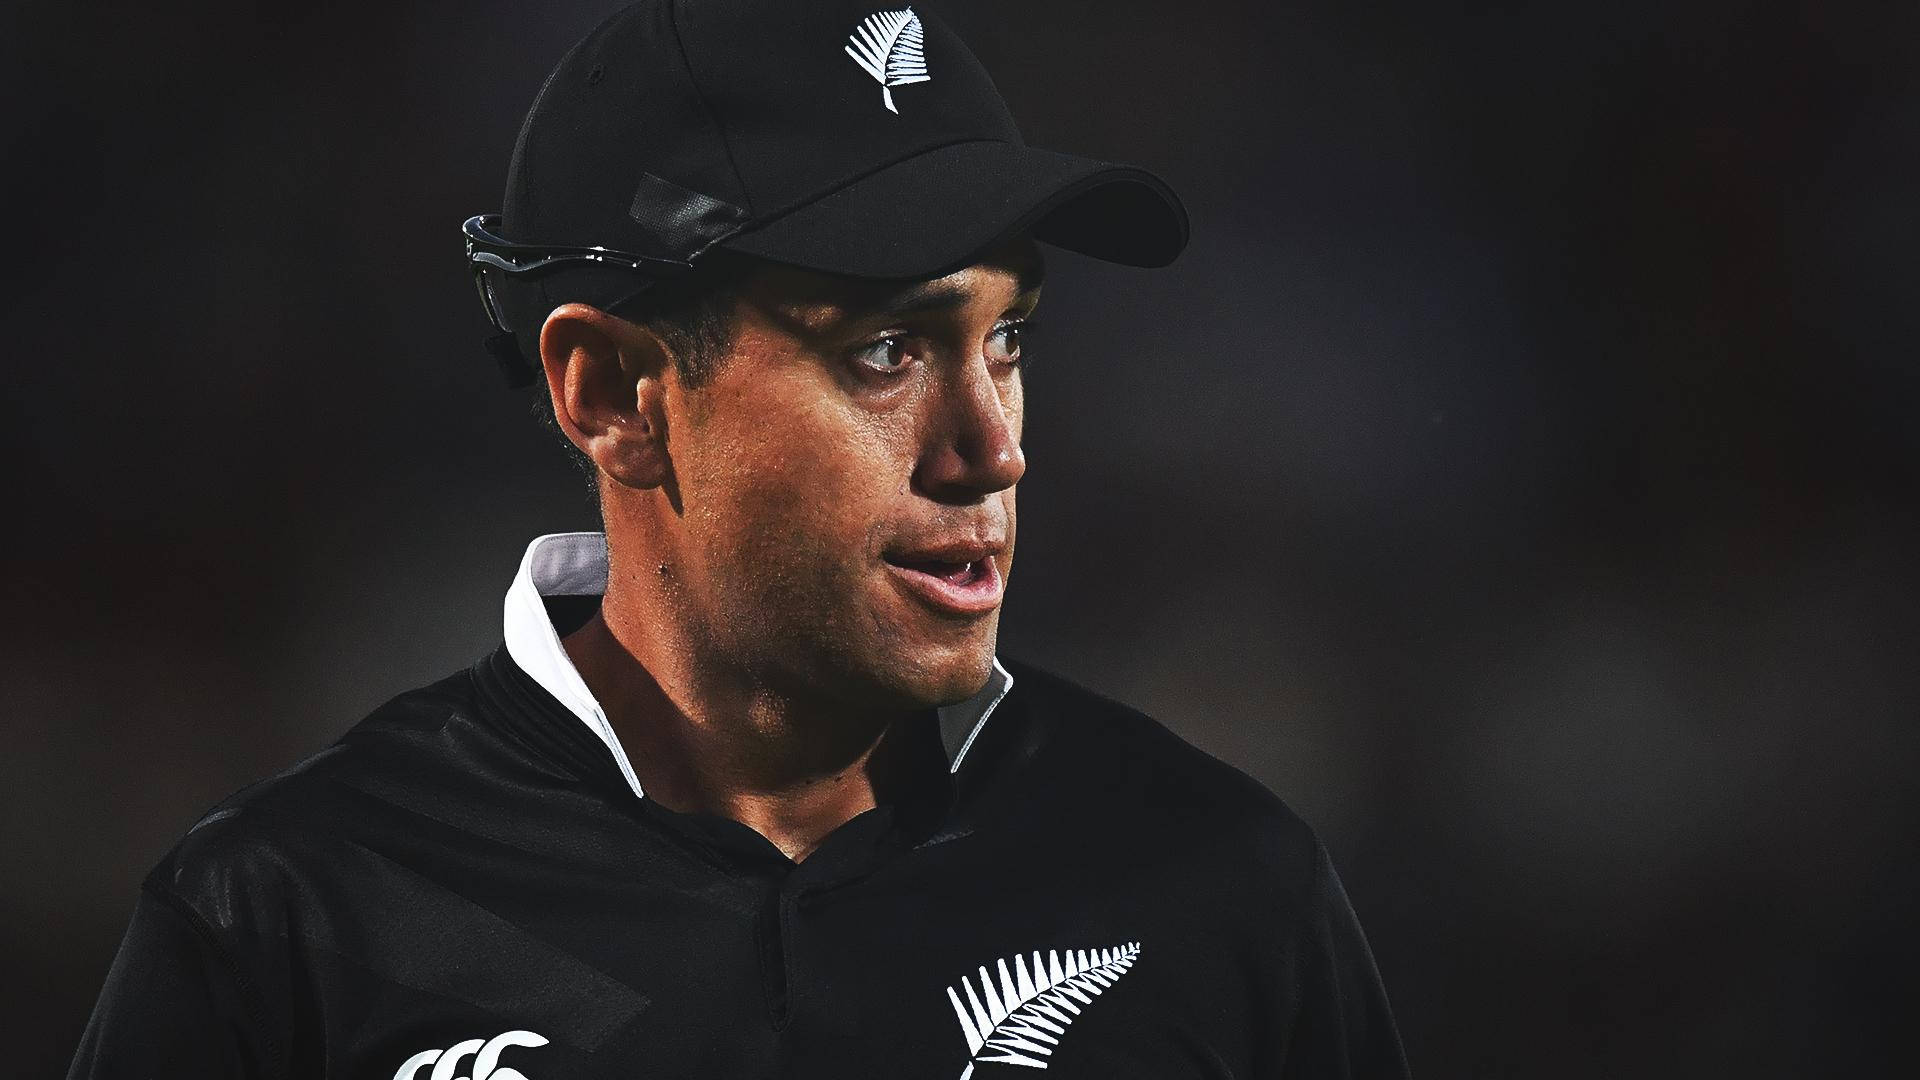 Ross Taylor In Black Background